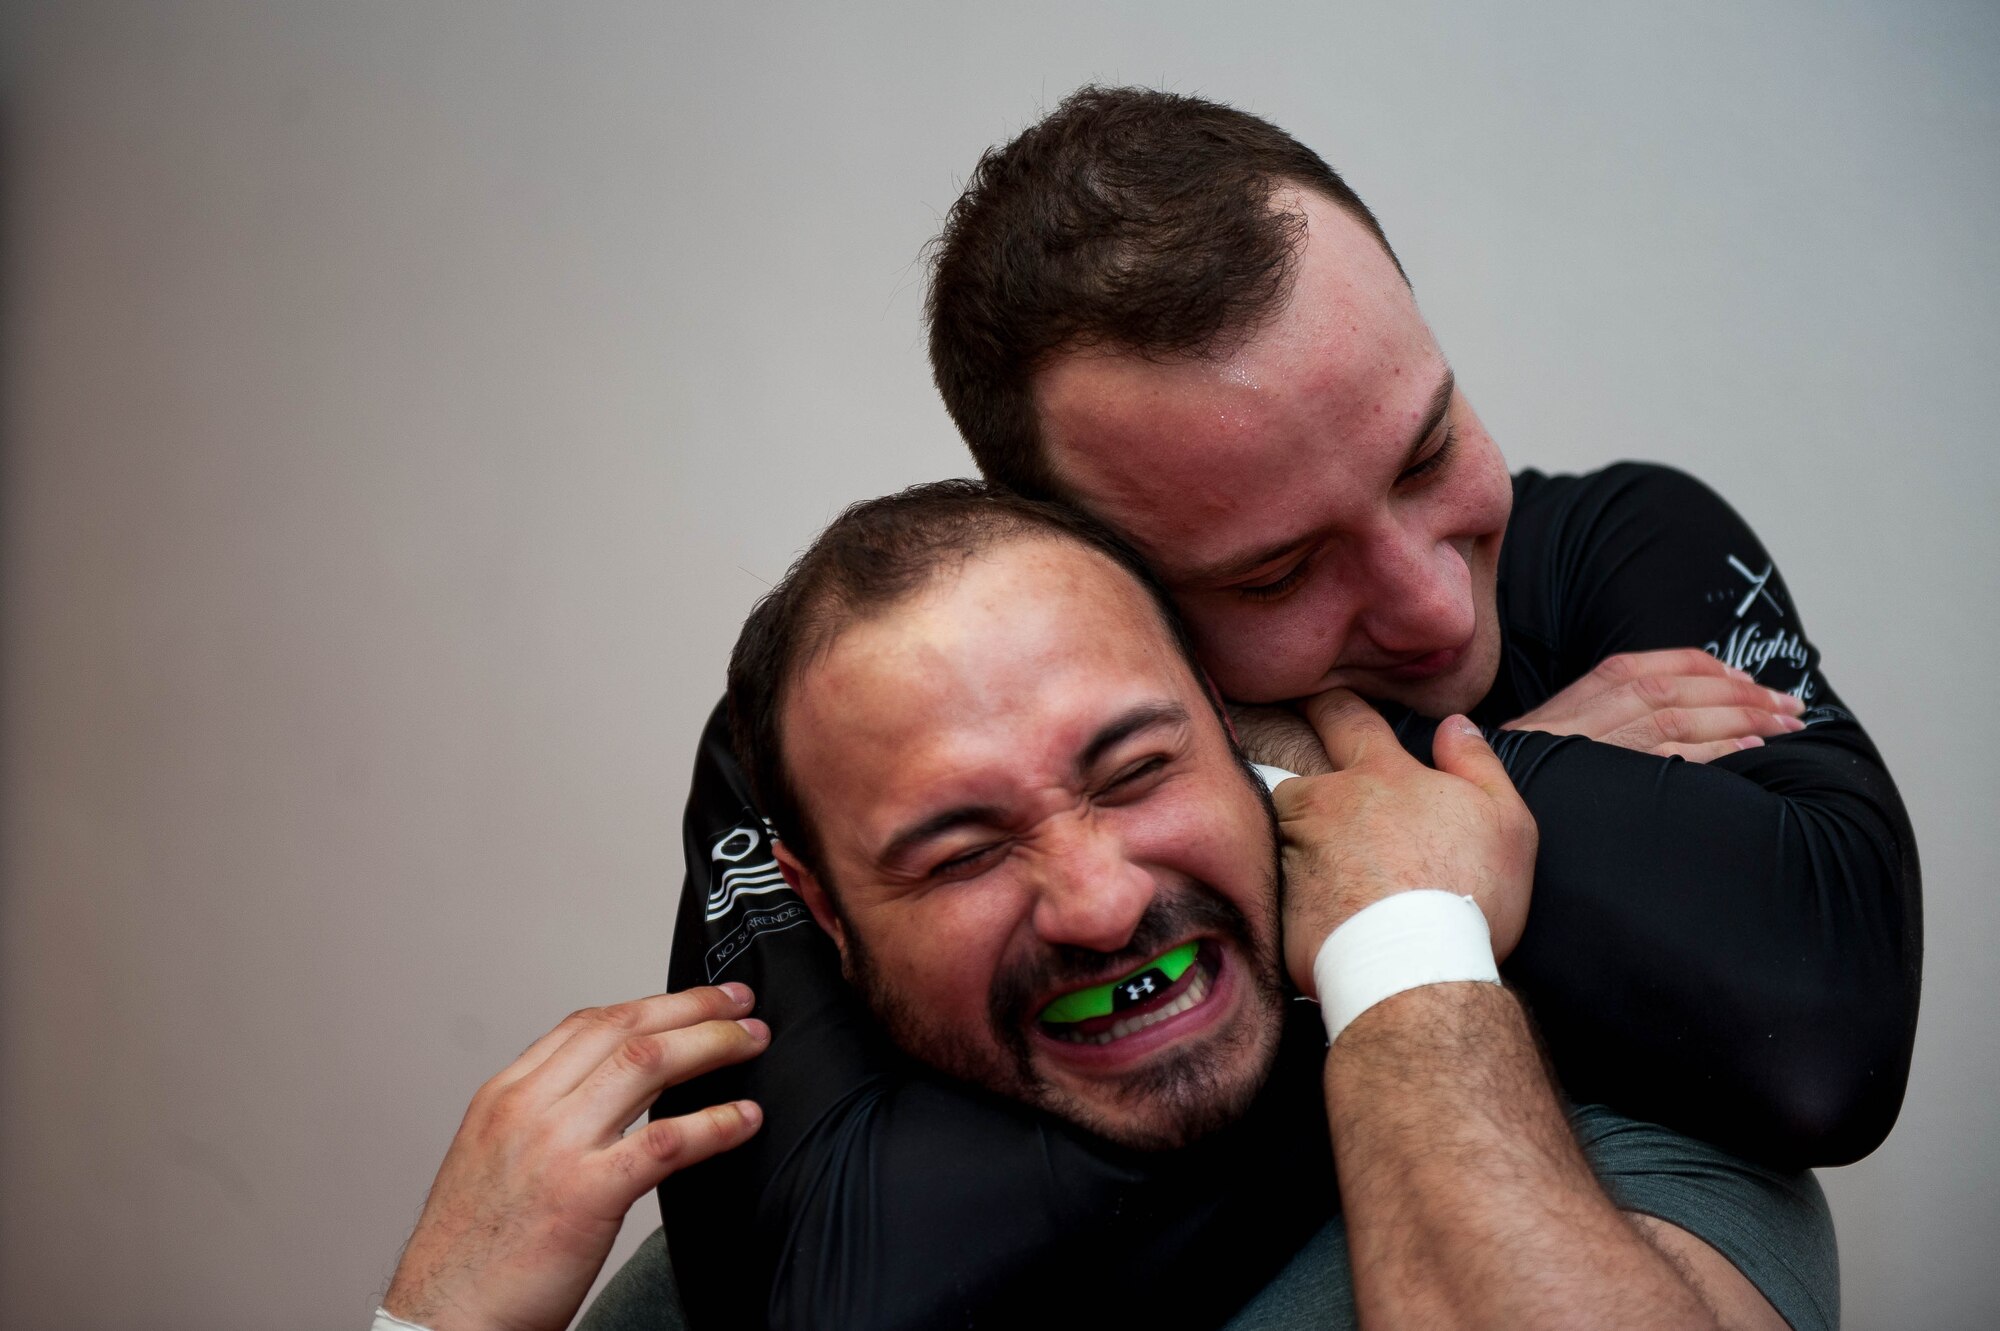 Emir Mulic performs the Mata Leão choke while jokingly hugging Giovani Gironda, Defense Logistics Agency contracting officer, during Brazilian Jiu Jitsu training on Ramstein Air Base, Germany, April 5, 2017. Mata Leão, also known as the rear naked choke, means “lion killer” in Portuguese. (U.S. Air Force photo by Senior Airman Devin Boyer/Released)